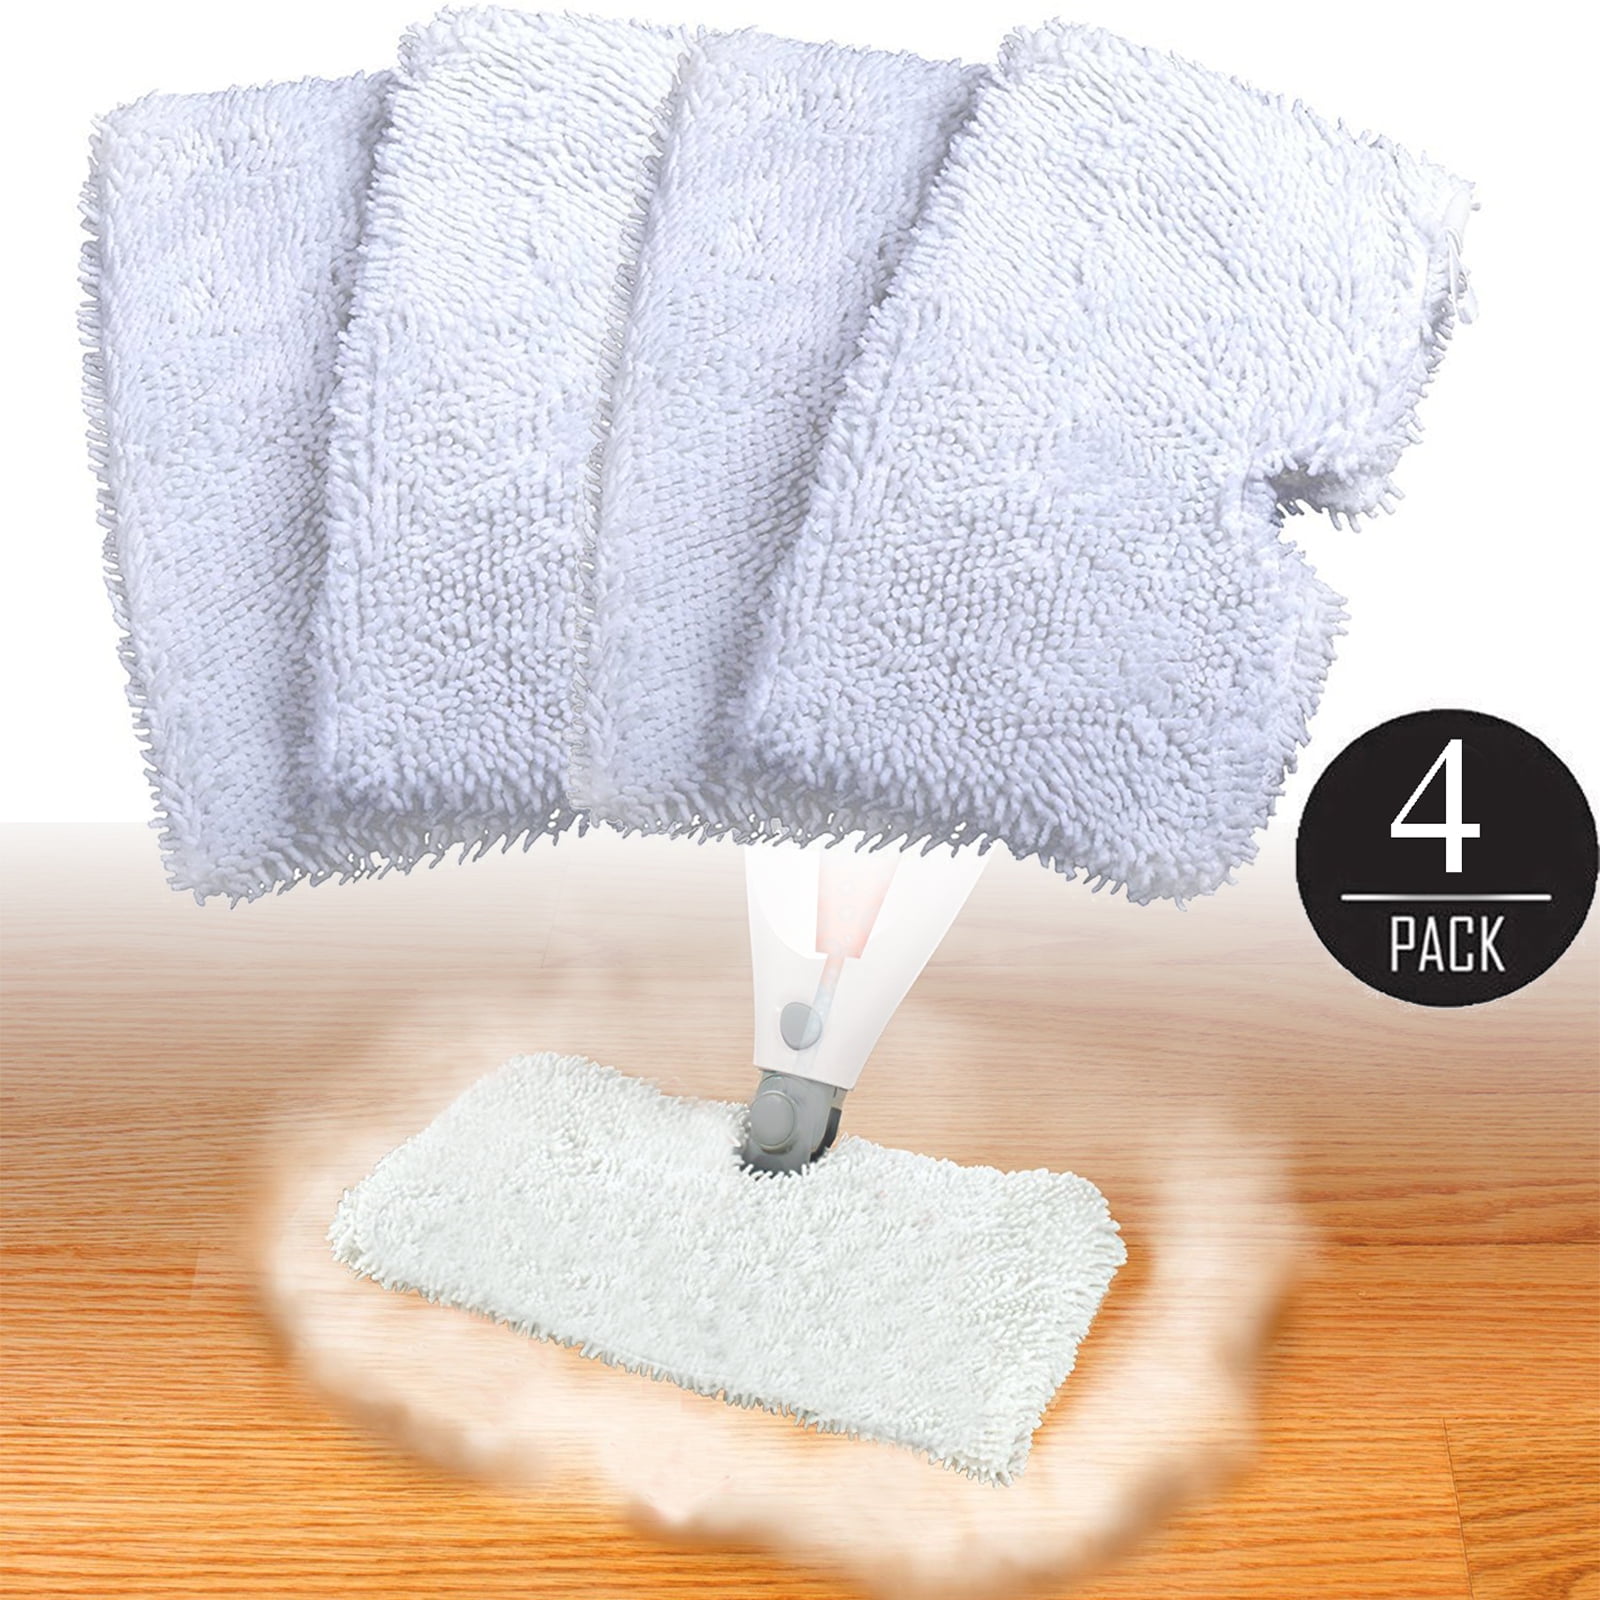 4x Steam Mop Pad Floor Cleaning Pad for Shark S6001 S6002 S6003 S5003 S3973 